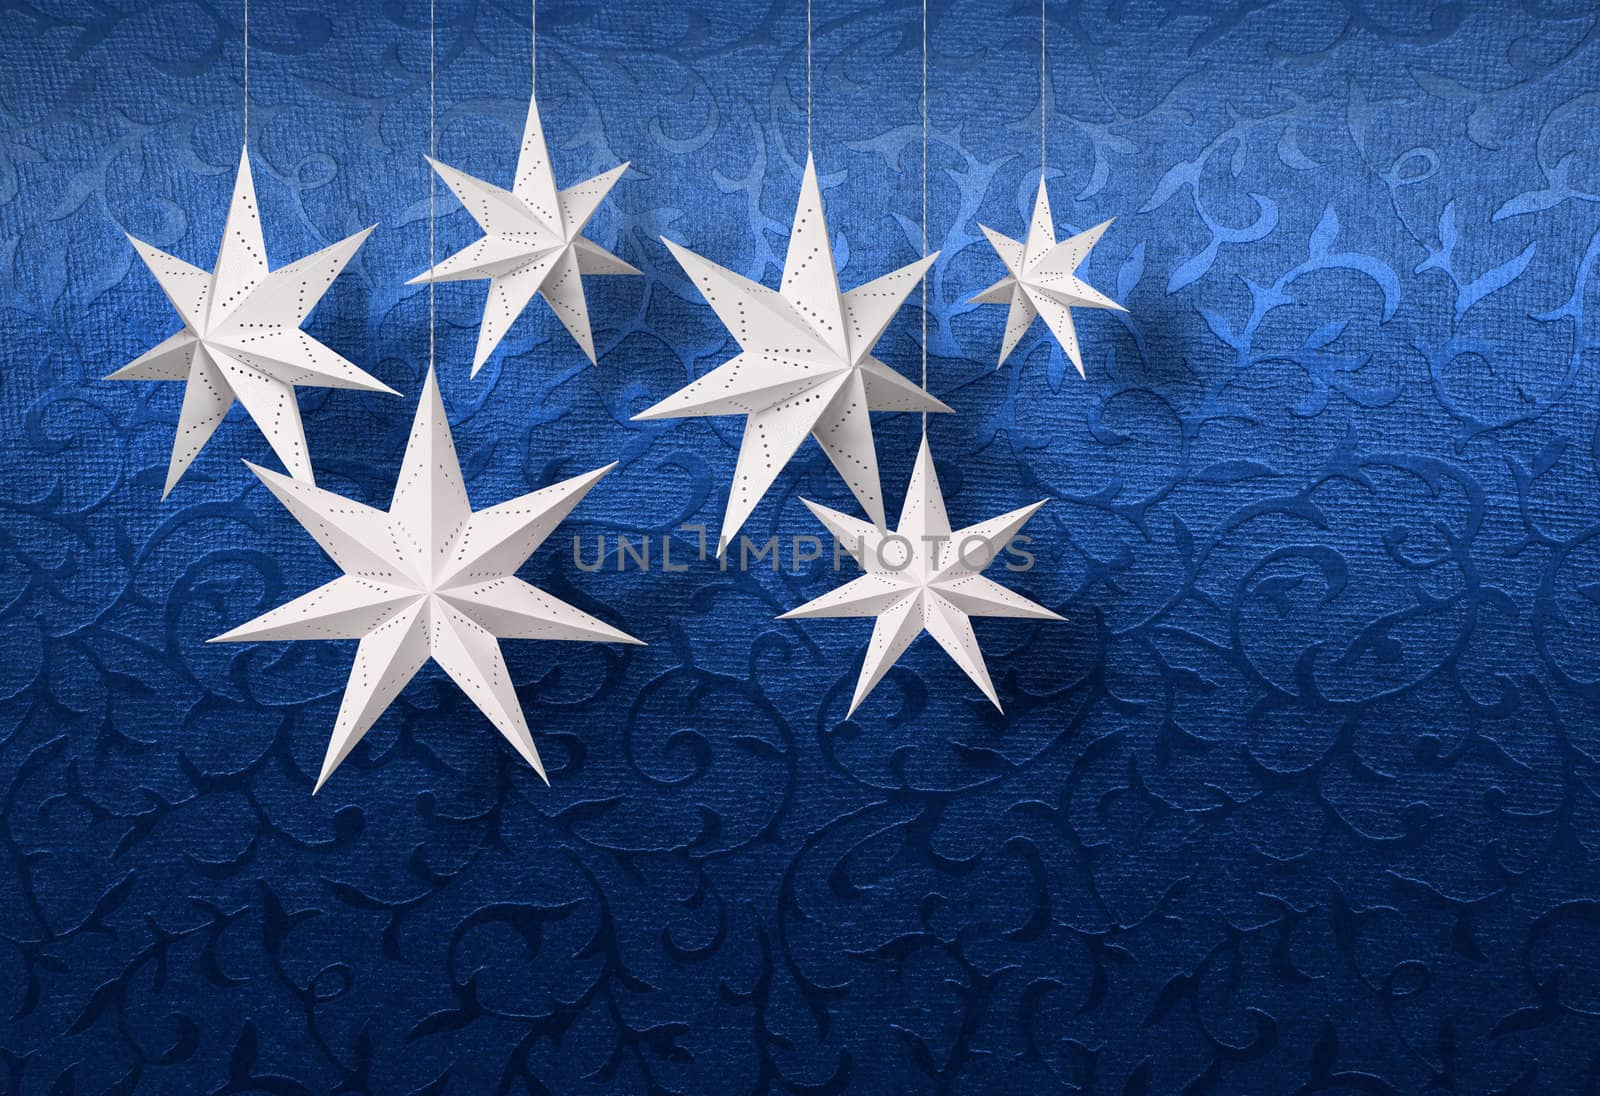 White paper stars on blue Christmas brocade pattern background